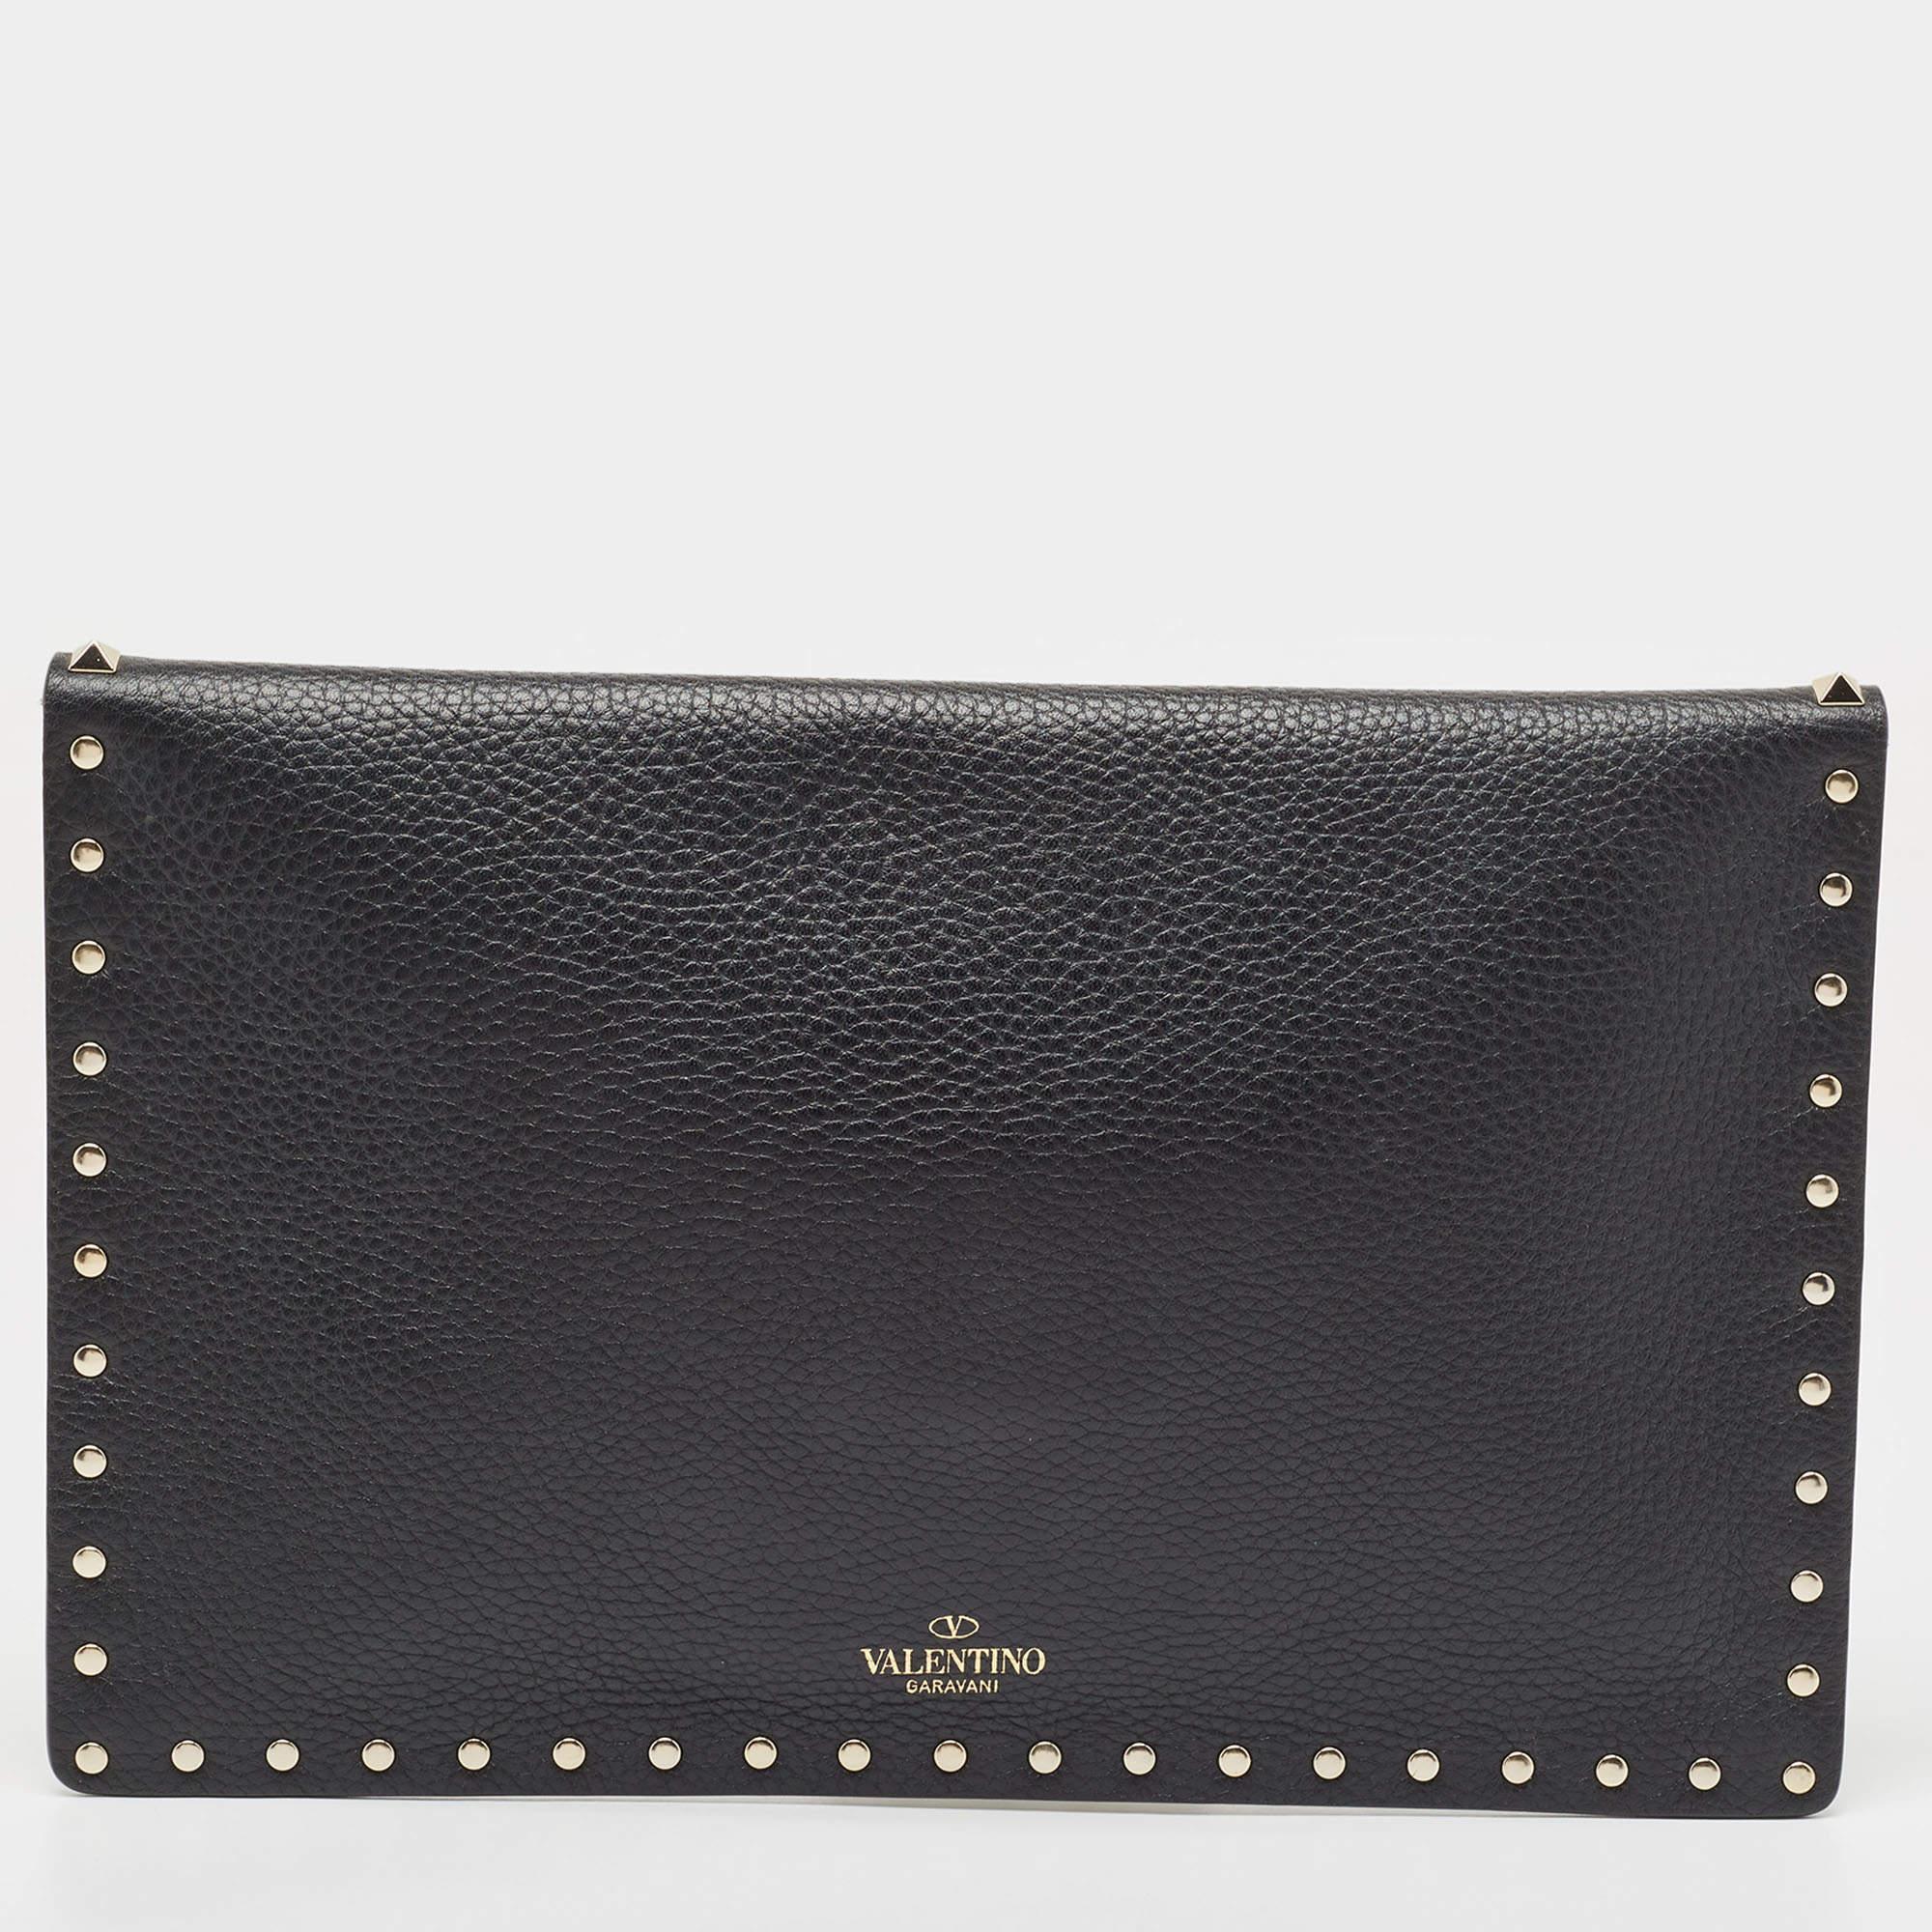 The Valentino pouch exudes sophistication with its sleek black leather and signature Rockstud detailing. Perfectly sized to hold essentials, it offers a luxurious feel with a touch of edge, making it a timeless accessory for any stylish